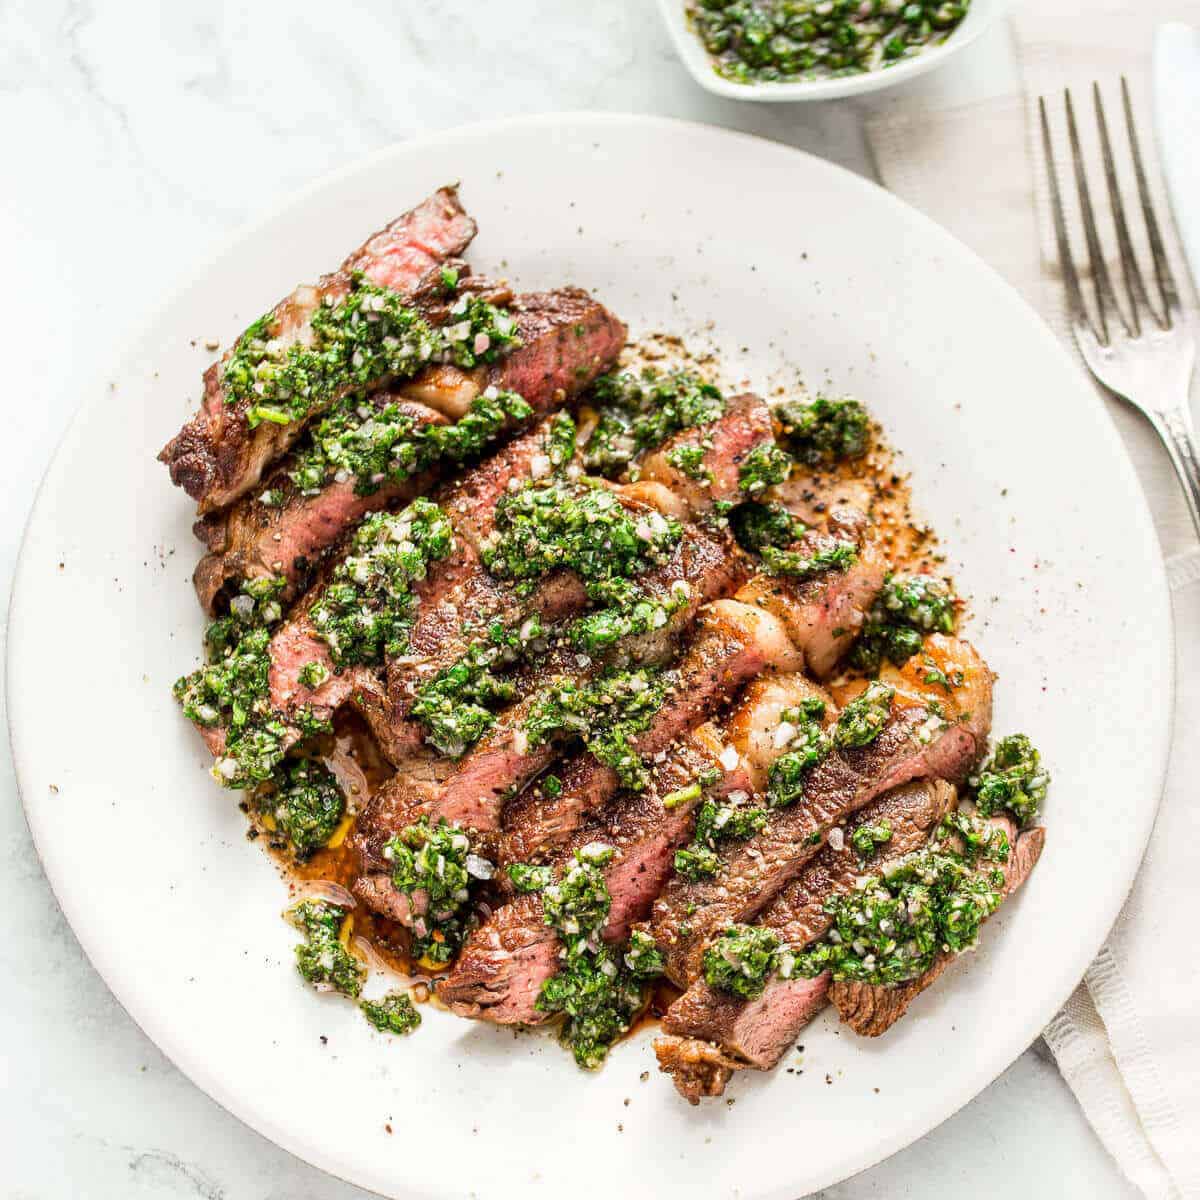 sliced steak with chimichurri sauce on white plate